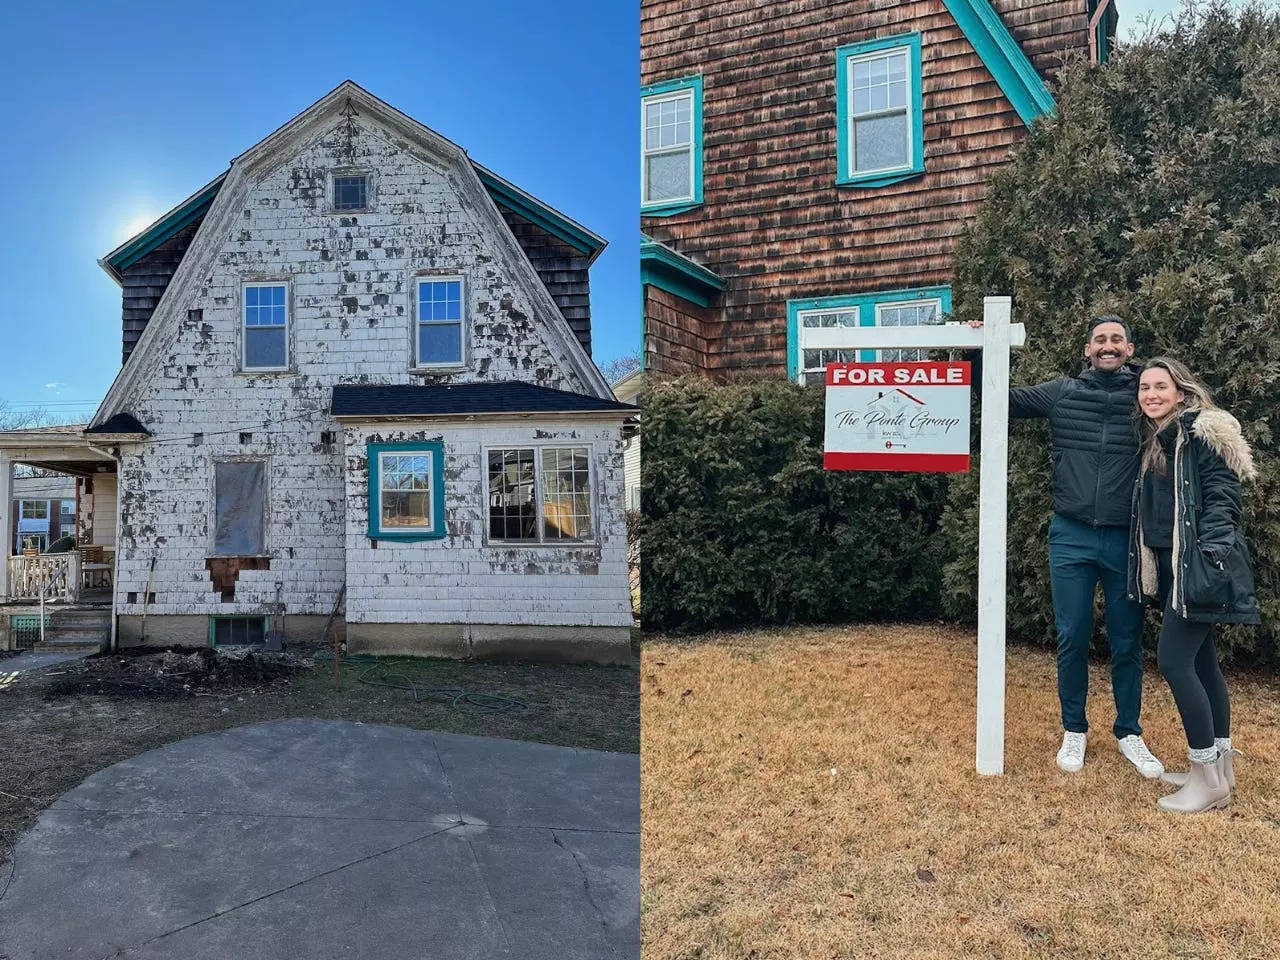 A photo of Greer Gagnier and Kyle Verma standing next to a for sale sign in front of their home (right) next to an exterior shot of the house during construction (left).